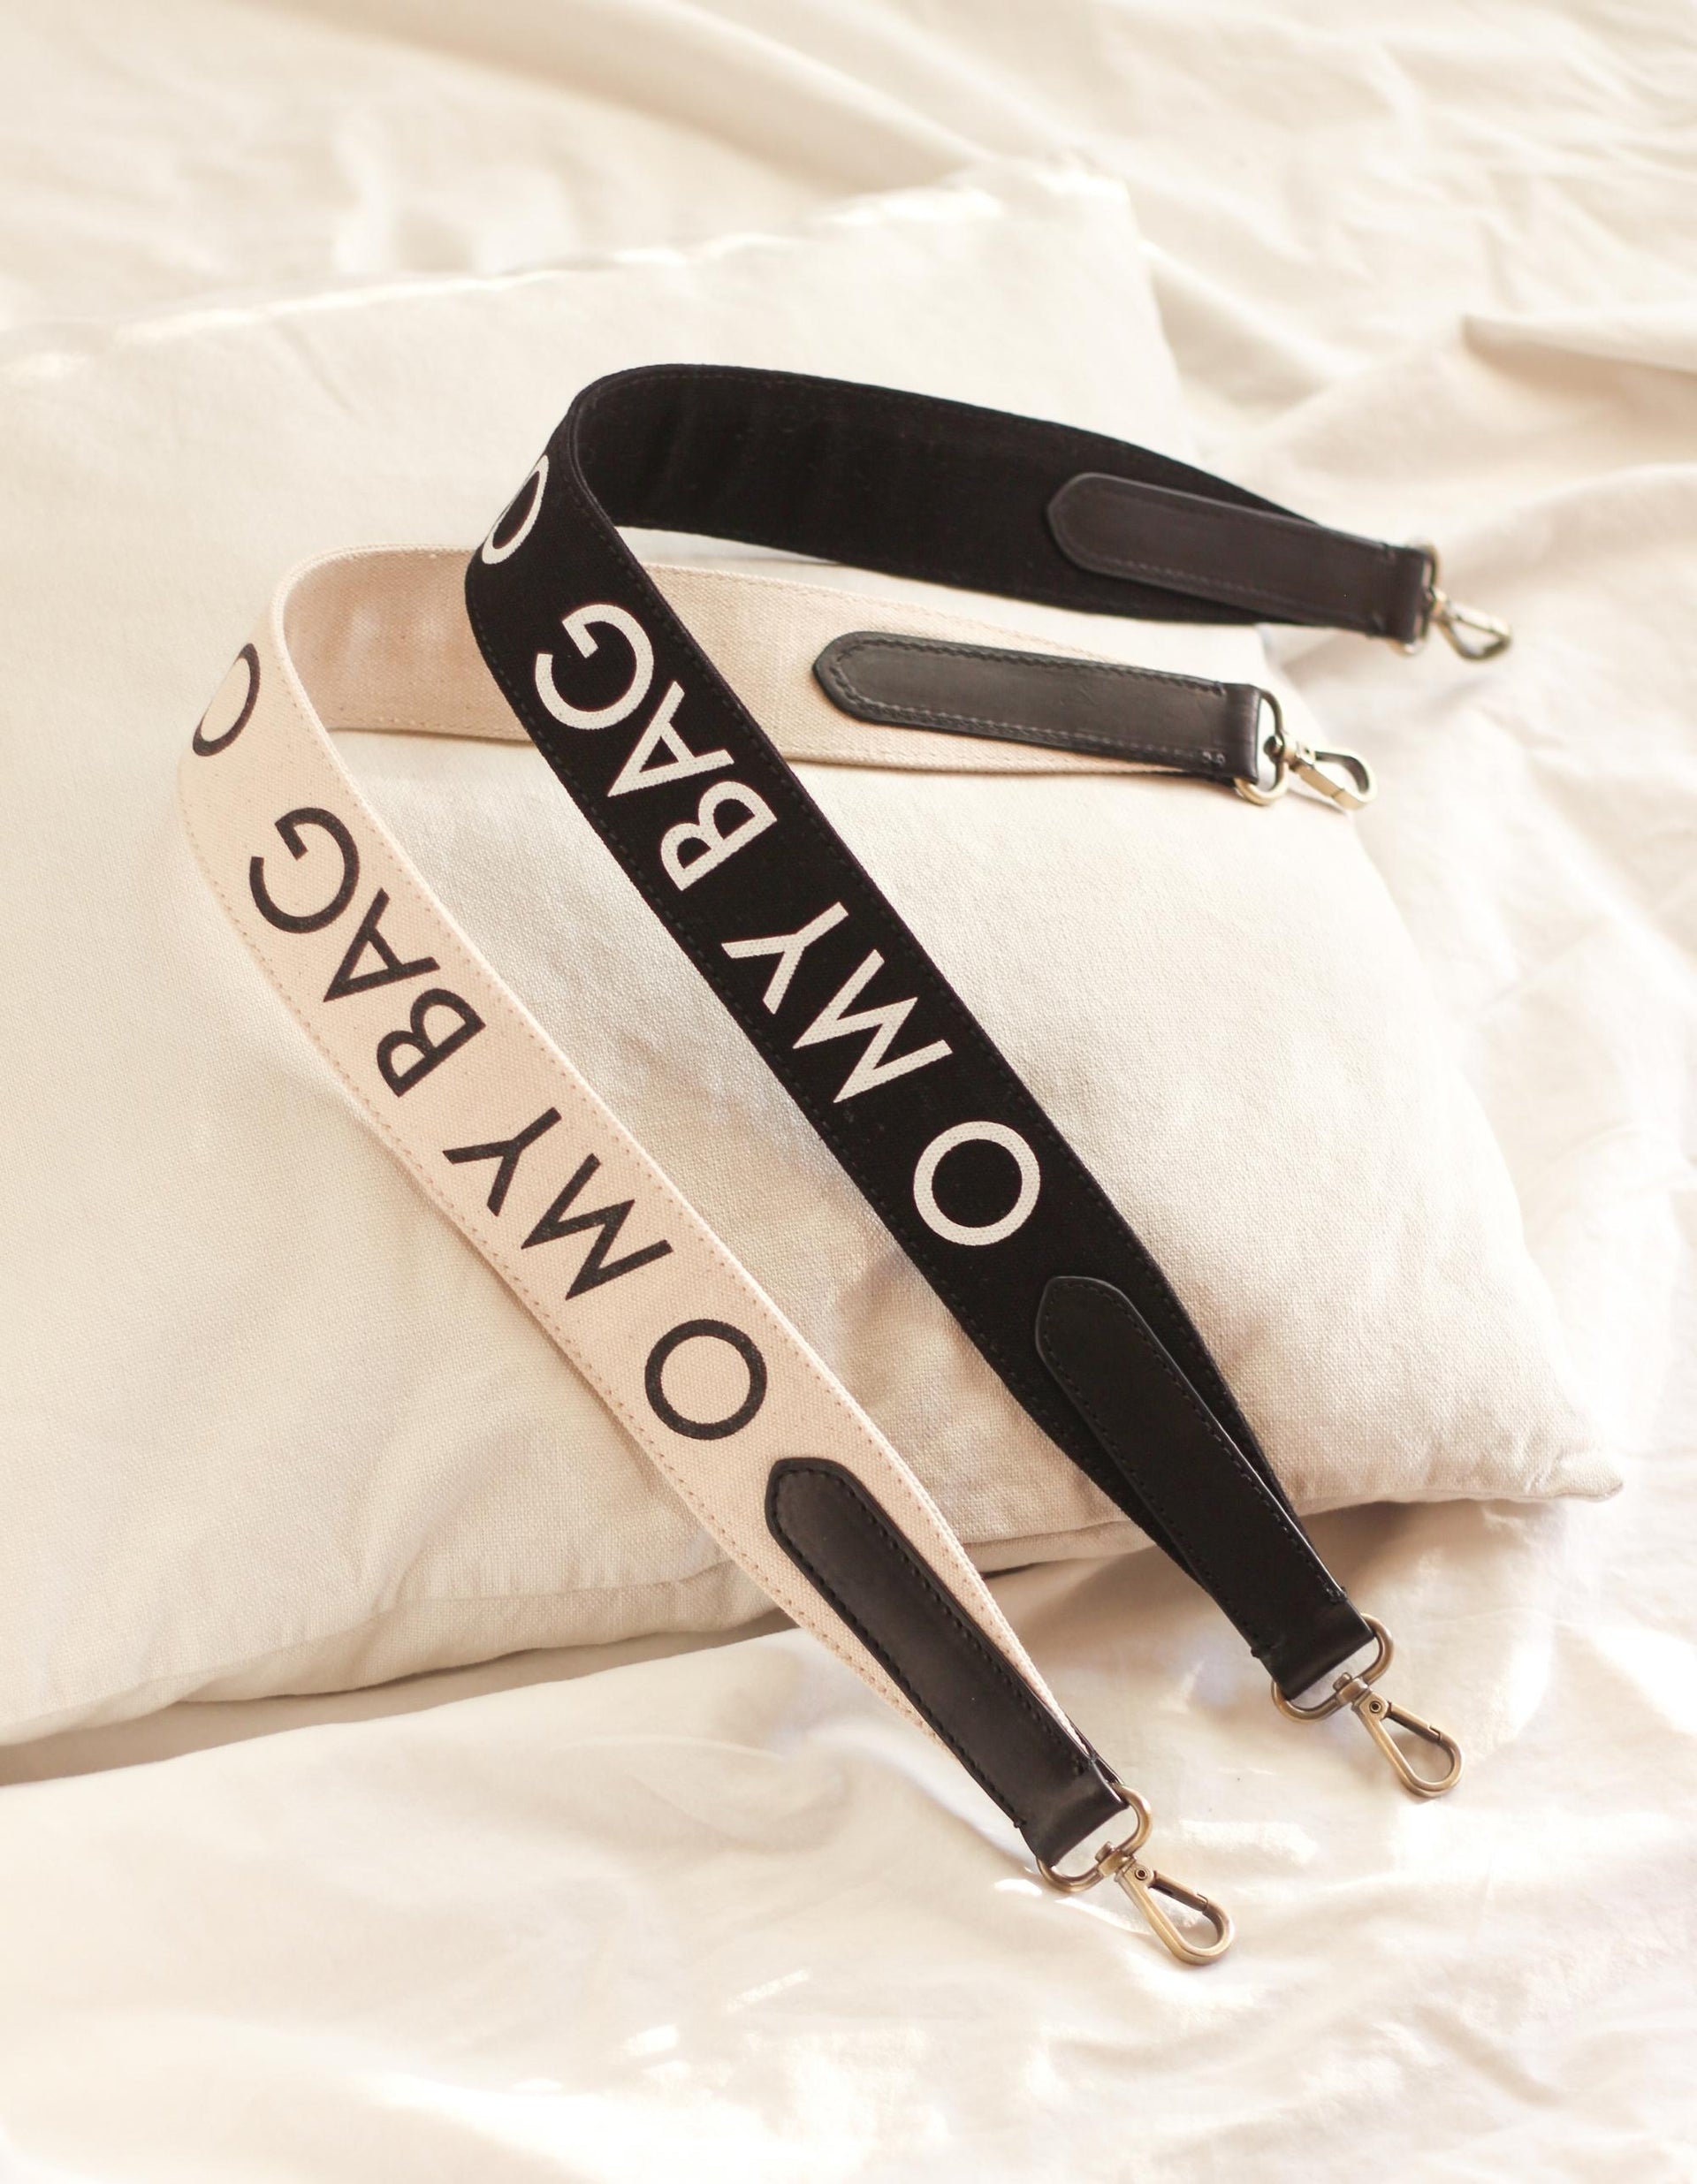 White canvas cotton handbag strap with black leather details and logo print. lifestyle image.